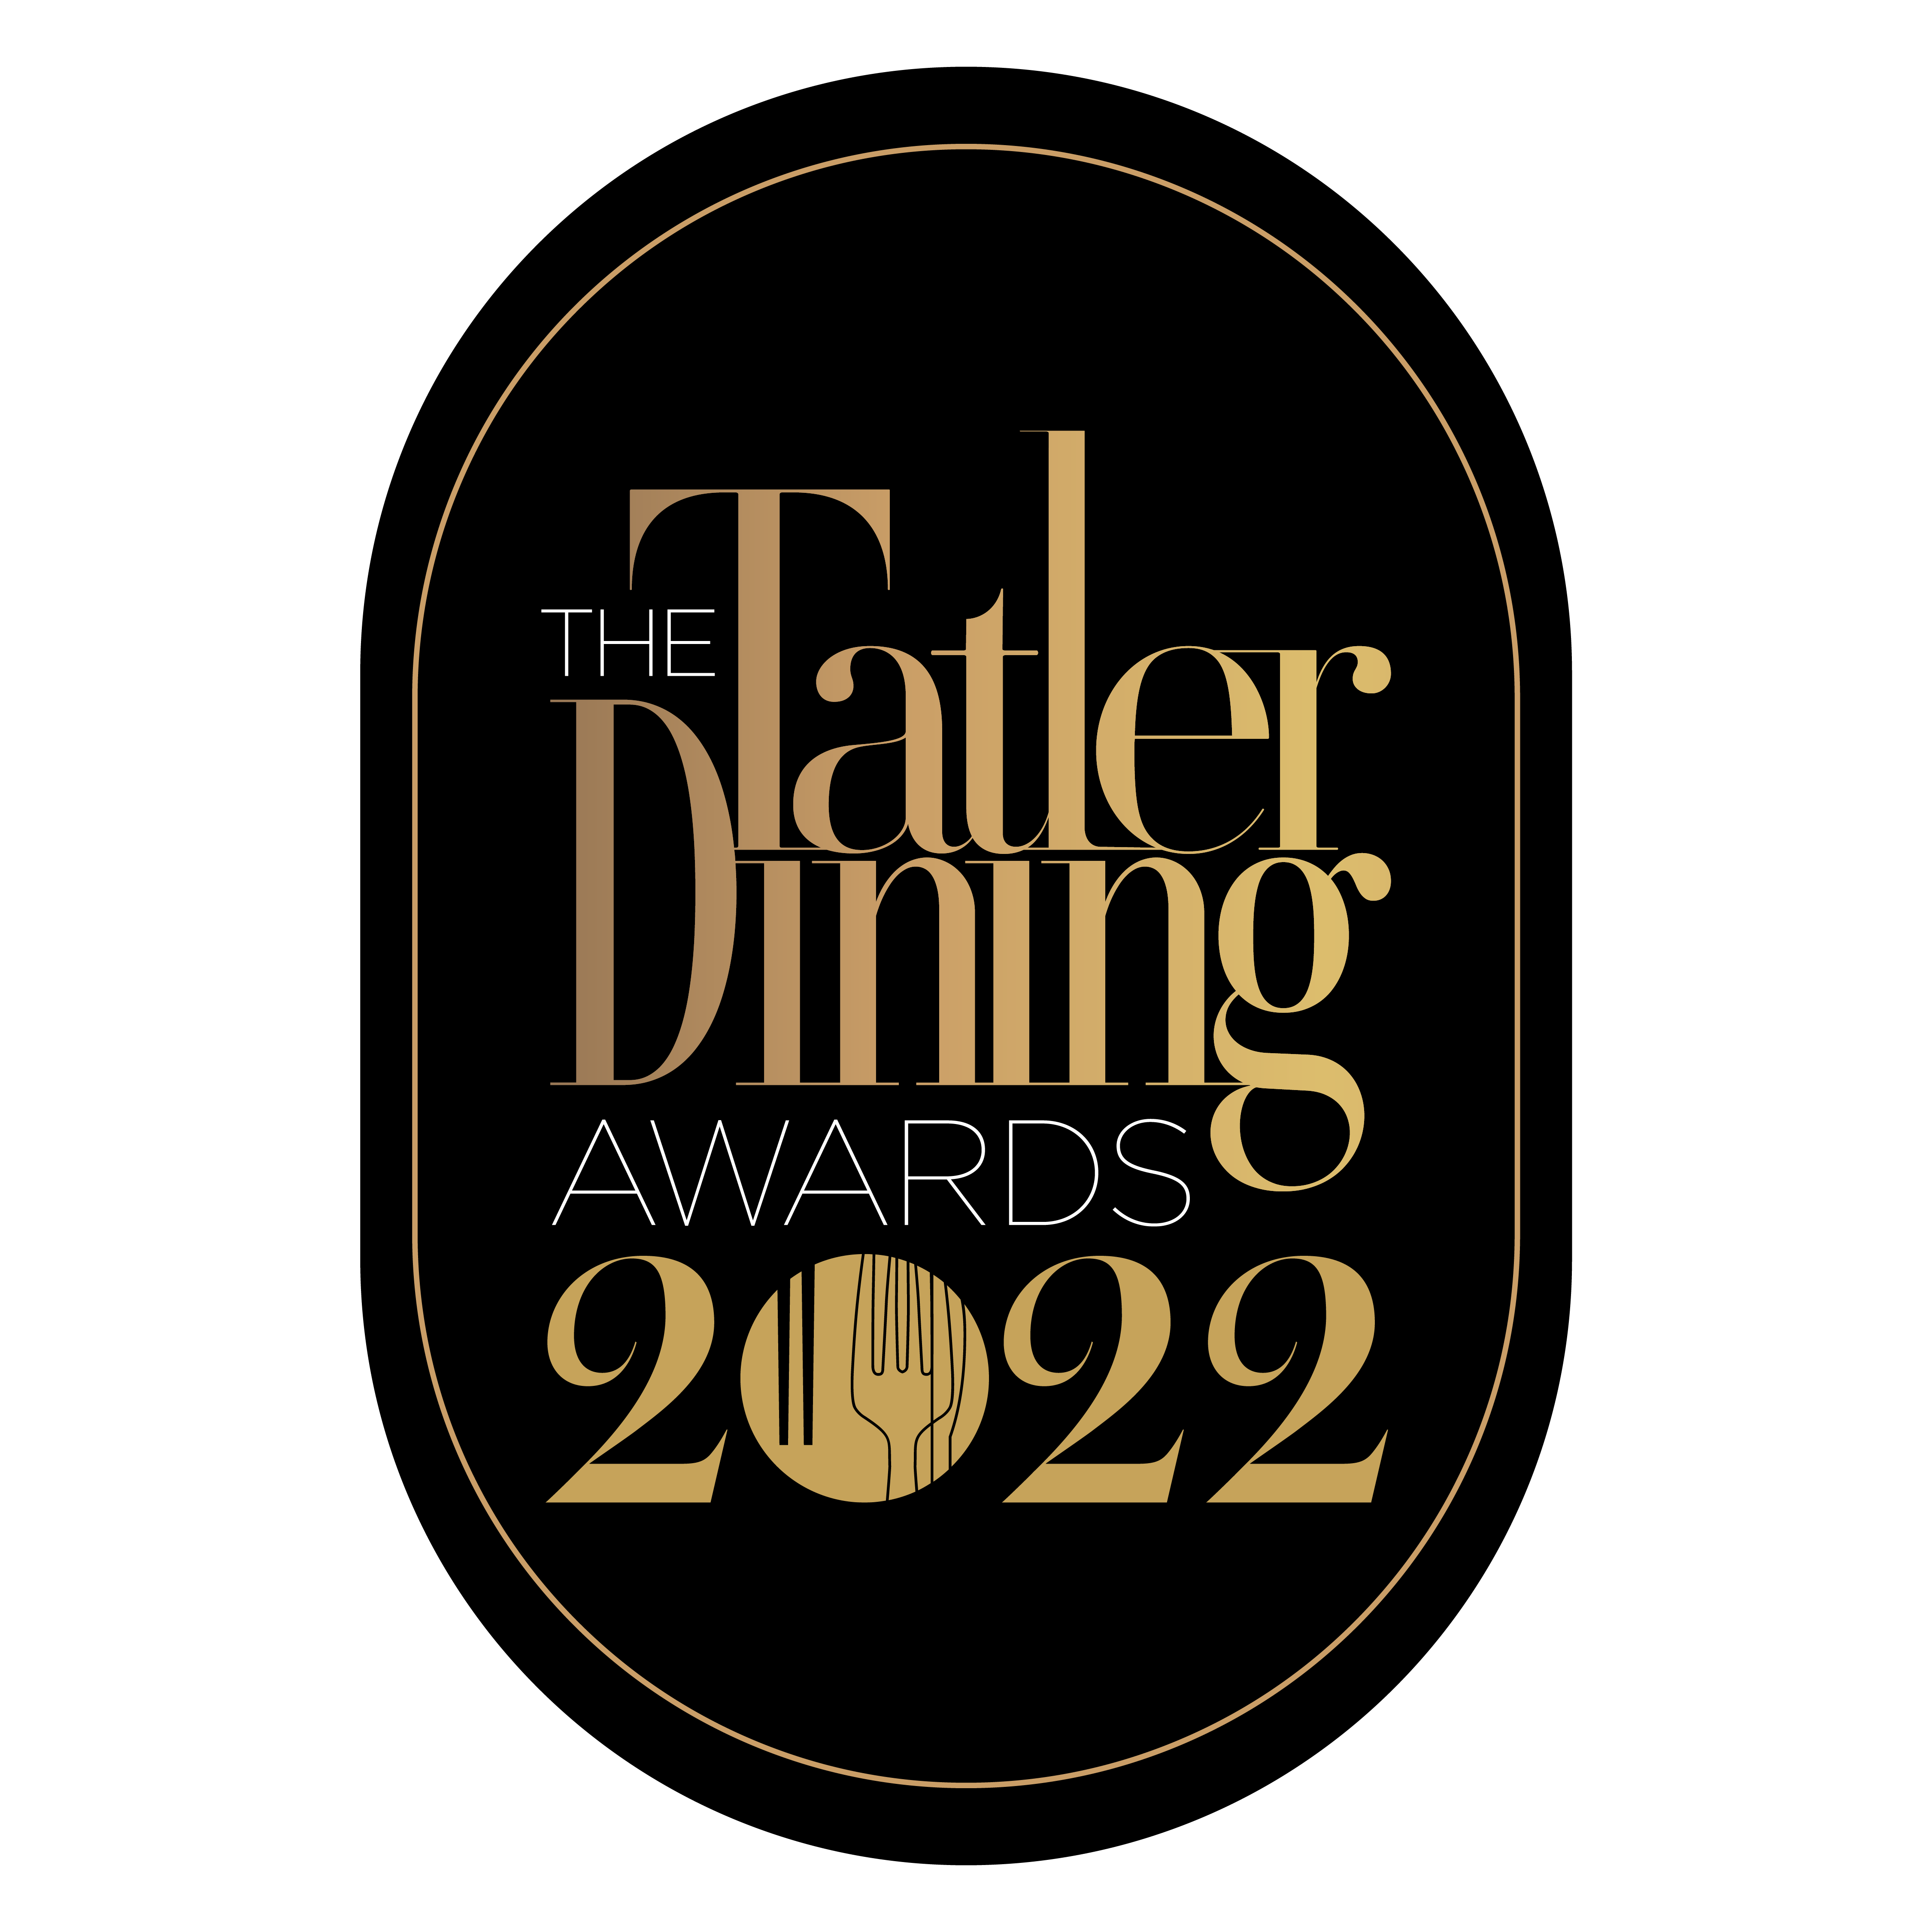 Tatler Dining Guide 2022 - The Tatler Dining 20 (Top 20 Restaurants of the Year)